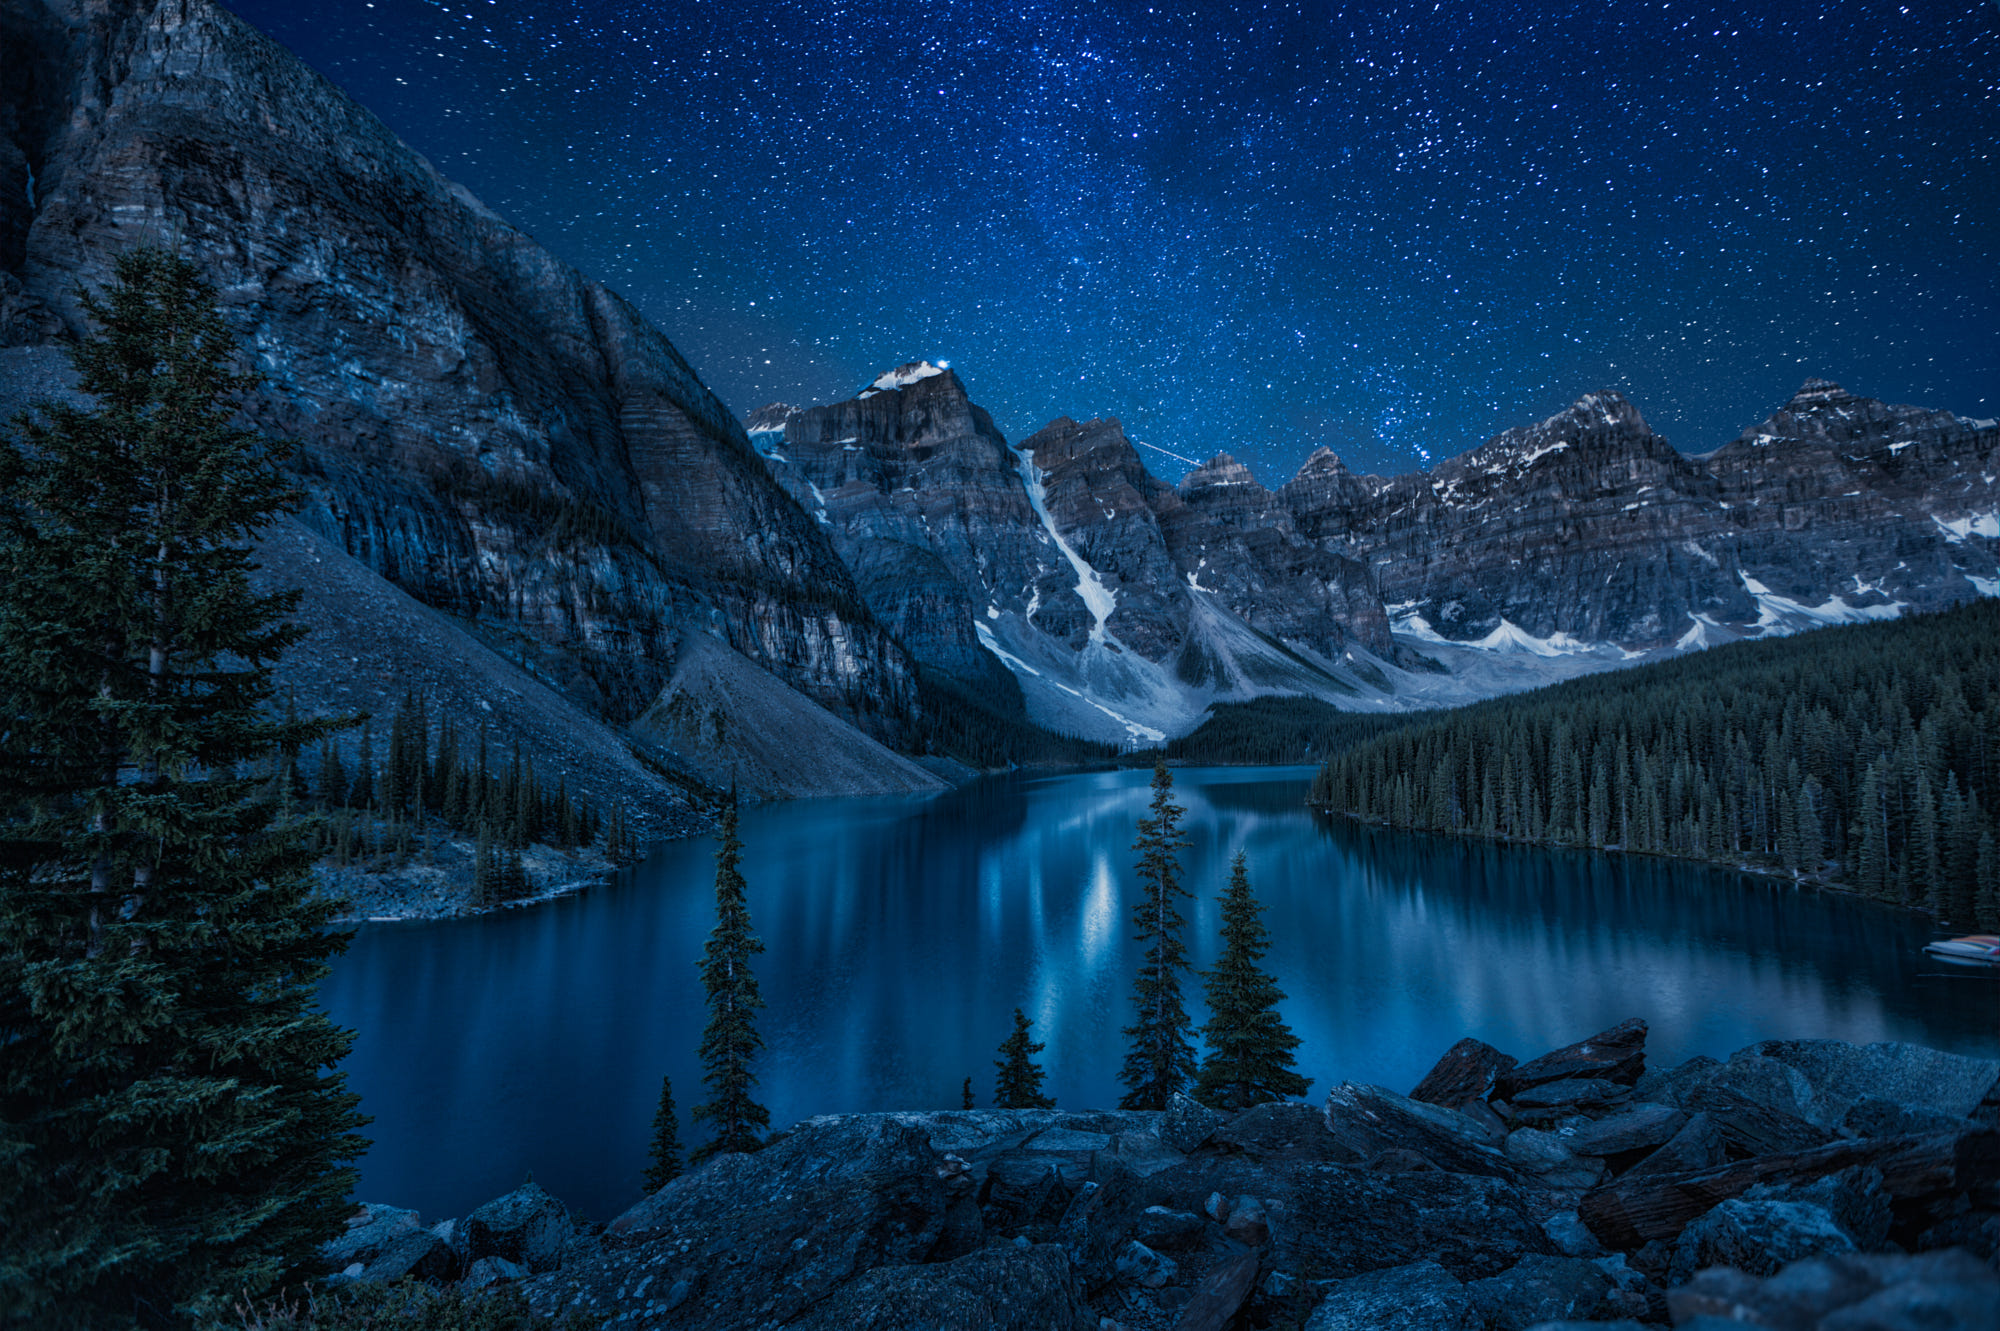 Moraine Lake at night by Andrey Popov - Photo 57050222 / 500px